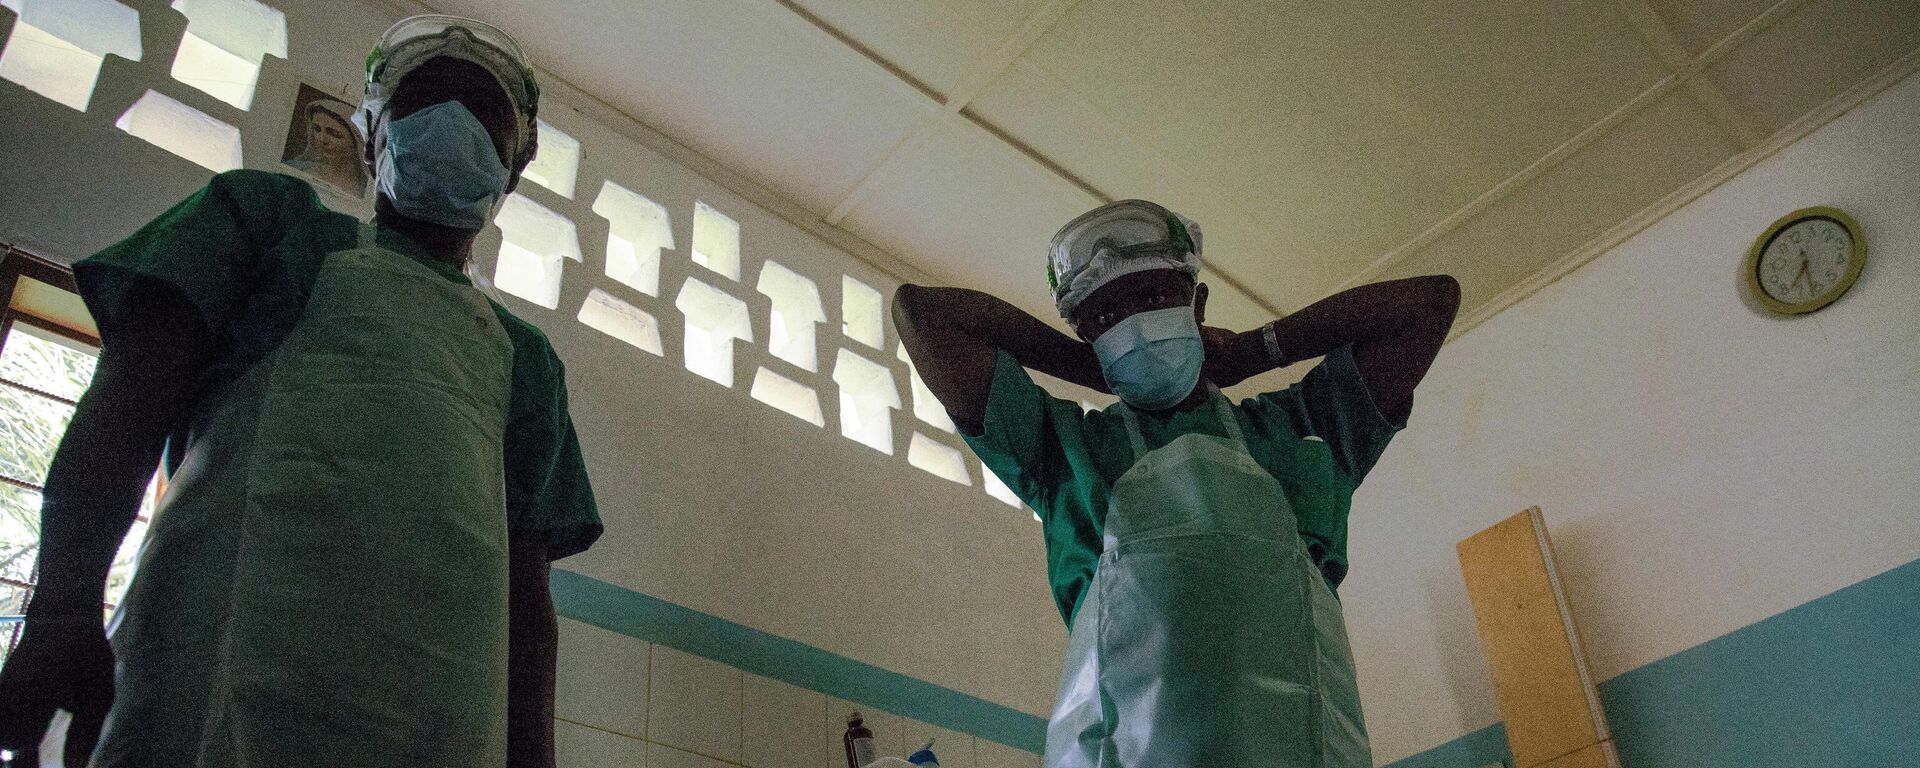 Medical staff wear protective equipments before entering the quarantine area of the centre of the International medical NGO Doctors Without Borders (Medecins sans frontieres - MSF), in Zomea Kaka, in the Lobaya region, in the Central African Republic on October 18, 2018. - Sputnik International, 1920, 02.06.2022